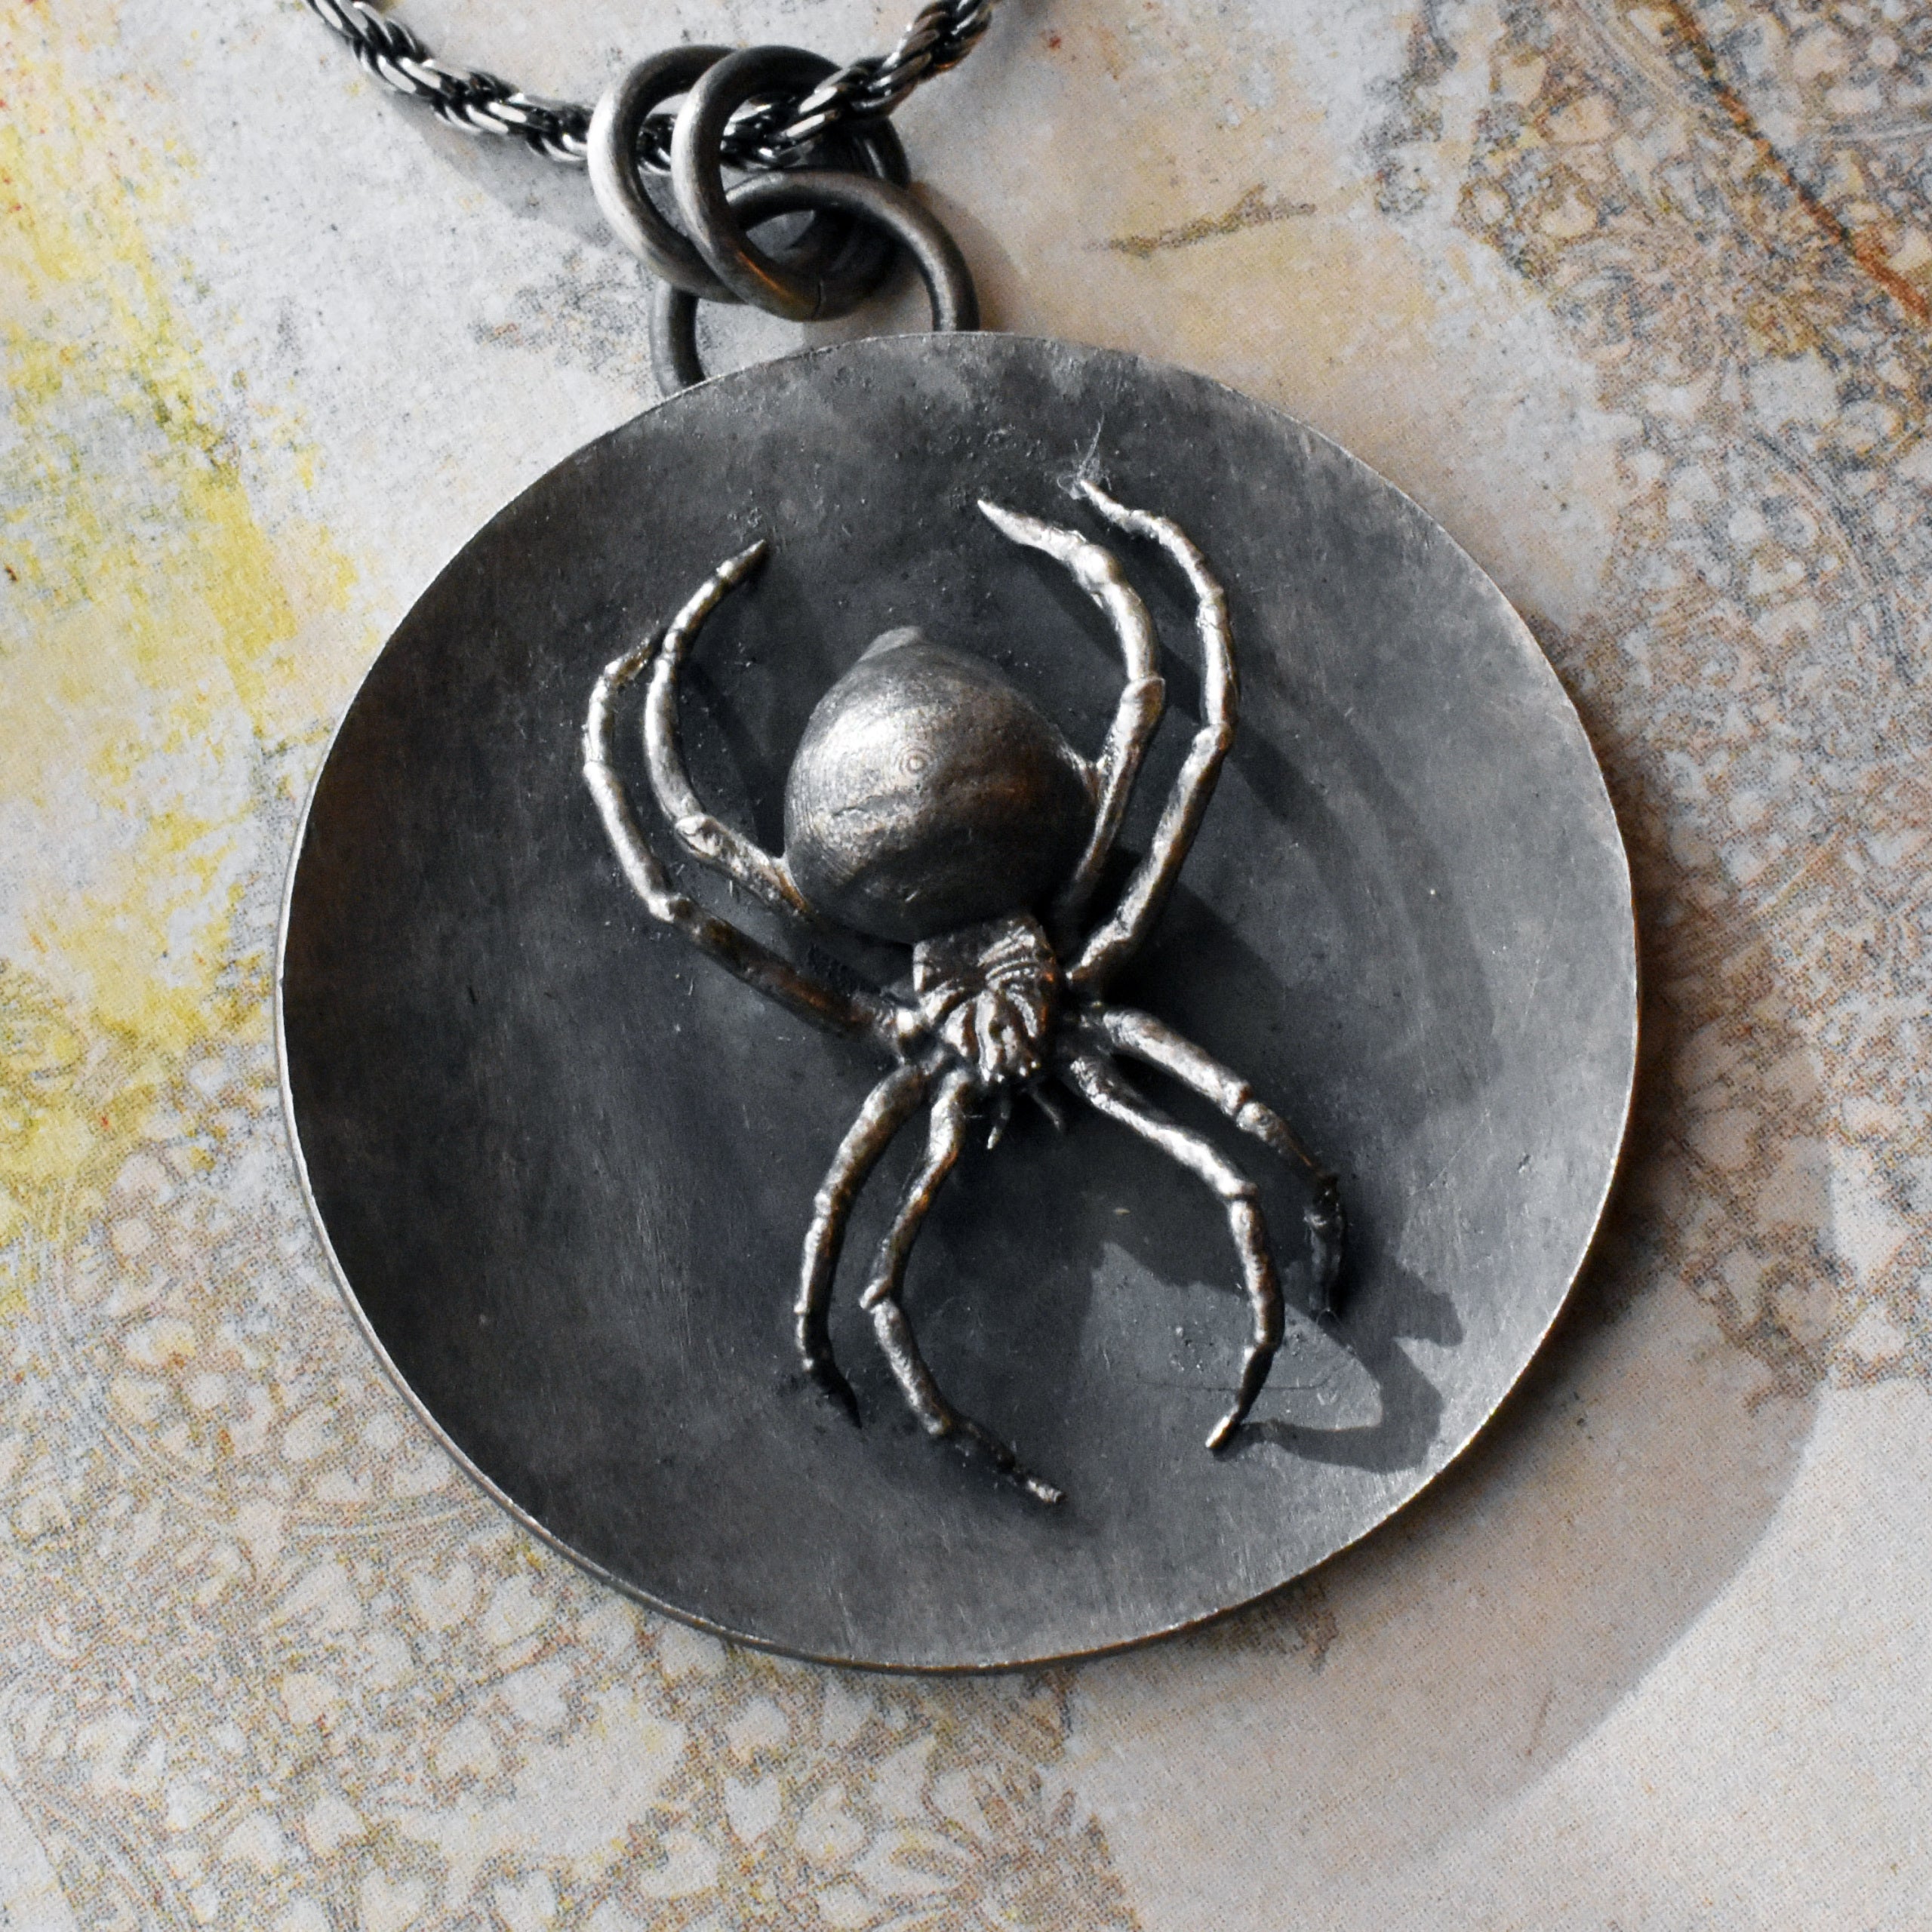 Black Widow Spider on Web Military Dog Tag Pendant Necklace with Chain -  Walmart.com